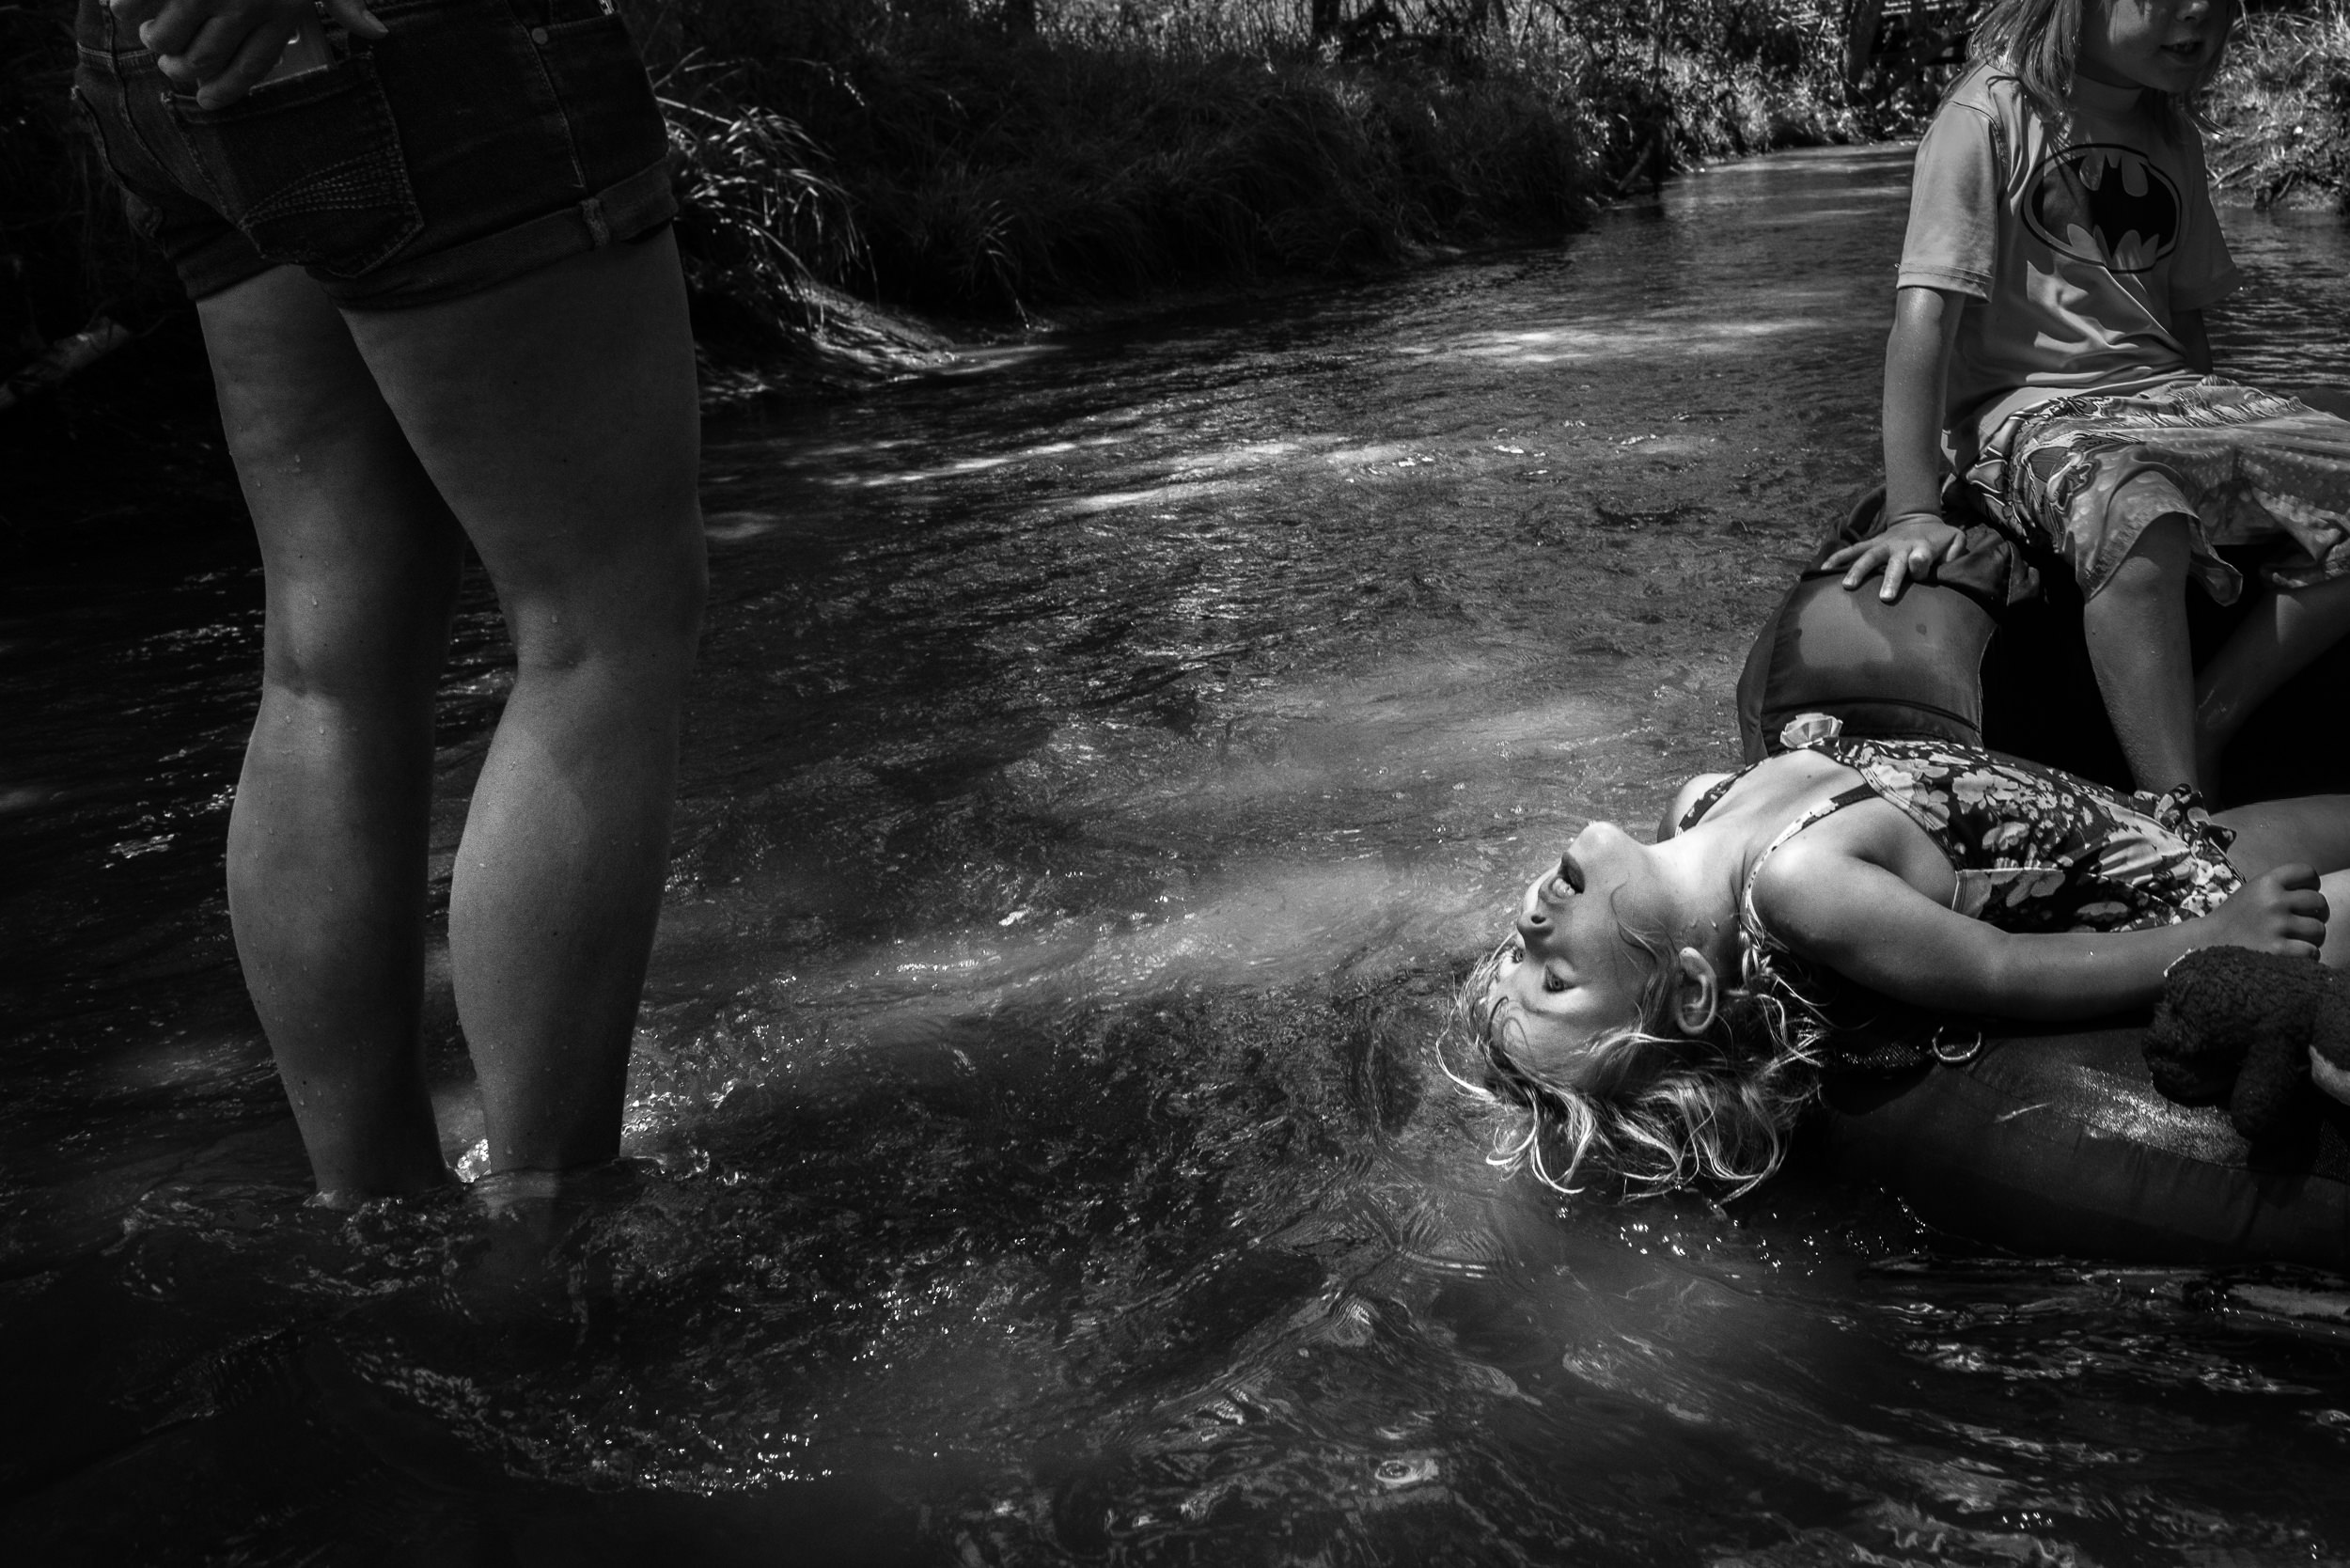 Blog - The Pen & Camera - Molly Rees Photo - Black and White Documentary Childhood Photography - children tubing in stream through woods at Belleview Park in Denver, Colorado by M. Menschel